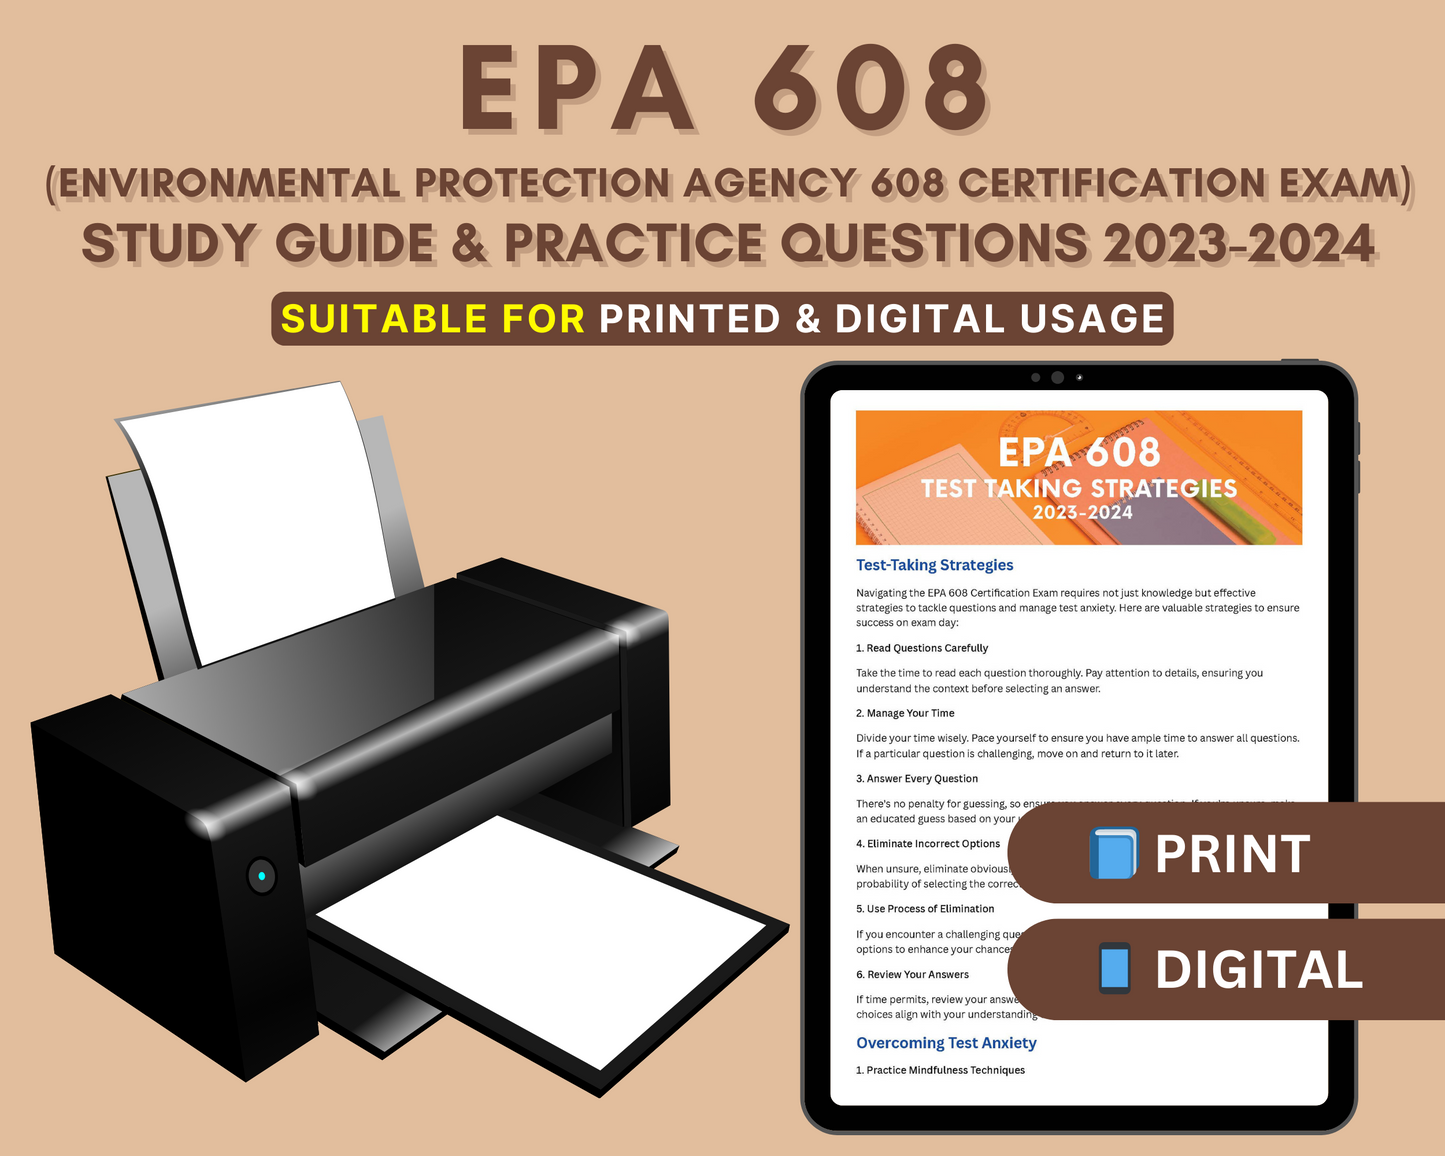 EPA 608 Certification 2023-2024: HVAC Mastery Guide With In-Depth Content Review, Practice Tests & Exam Strategies